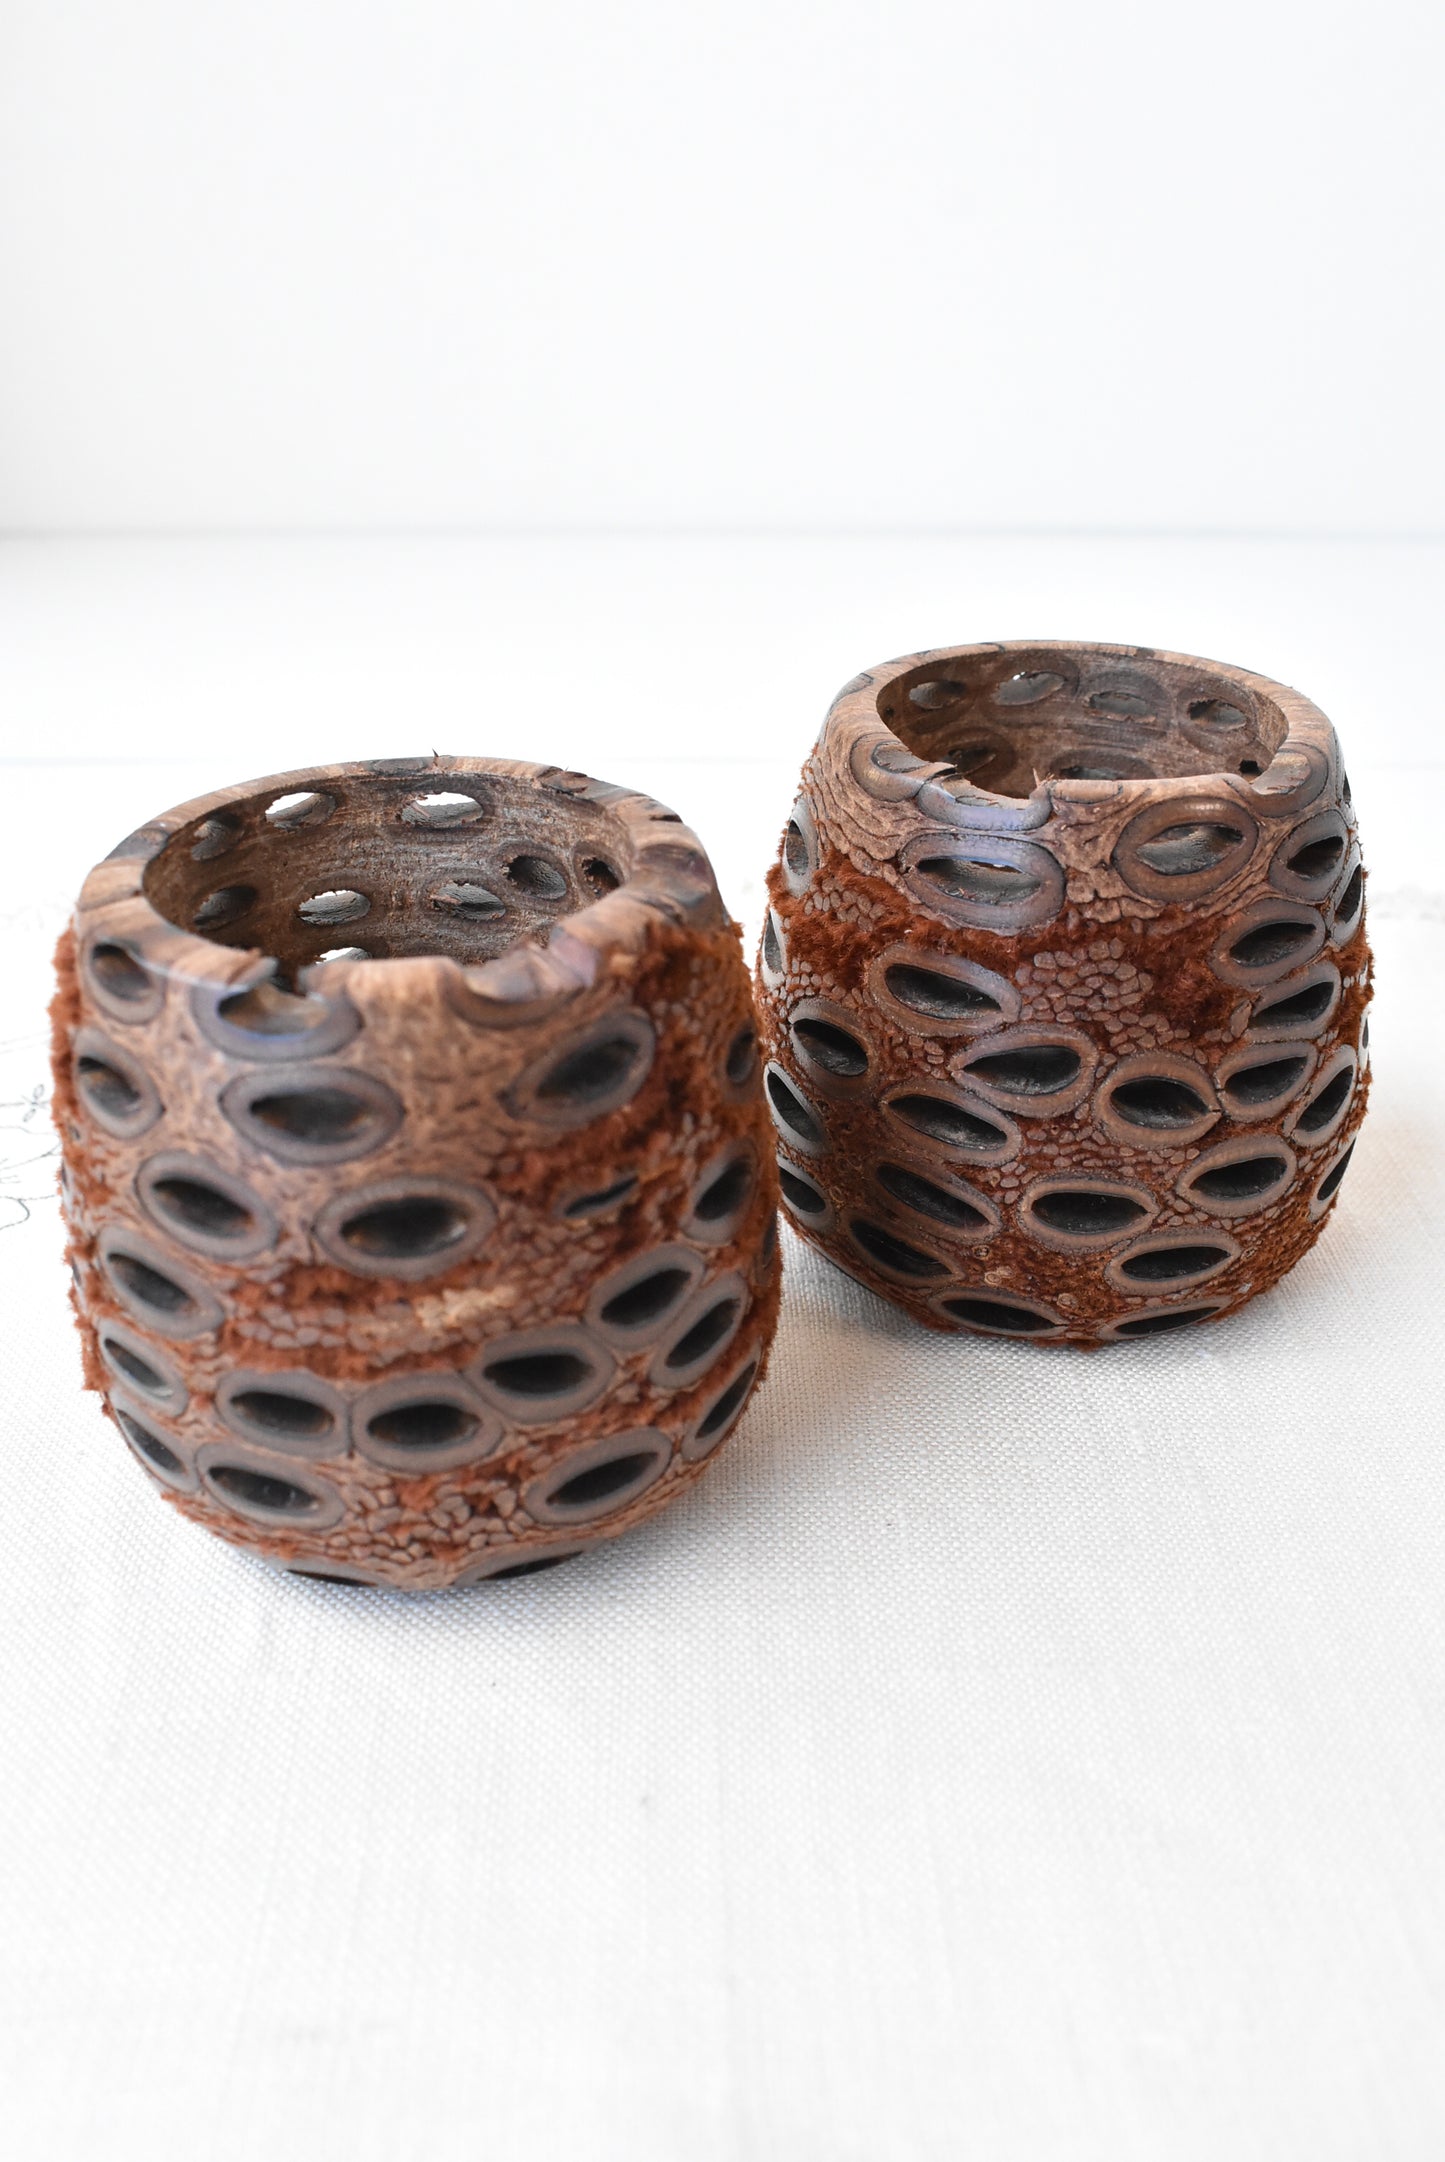 Set of two wooden tealight candle holders